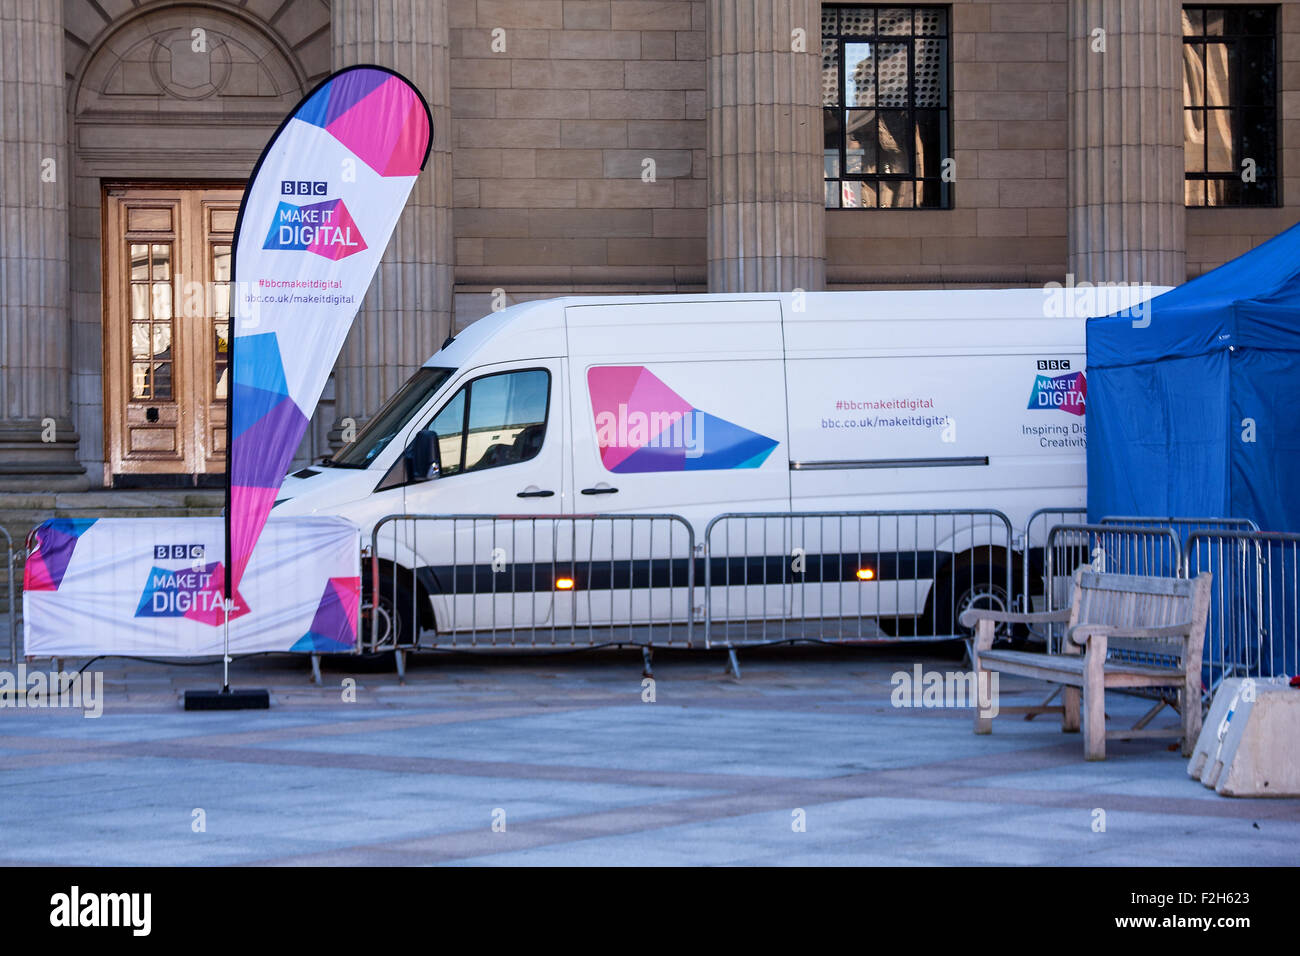 Dundee, Tayside, Scotland, UK, 19th September 2015. Crowds gather on opening day of The BBC “Make It Digital” weekend showcase in Dundee City Square today 19th September and tomorrow 20th September. Opening times are between 1000-1700 on Saturday and 1100 – 1700 on Sunday. “BBC Weather” which uses the variables found in the jet stream to introduce visitors to the basics of coding. “Doctor Who” offers the chance to get to grips with coding by programming The Doctor’s arch enemy, the Daleks. © Dundee Photographics / Alamy Live News. Stock Photo